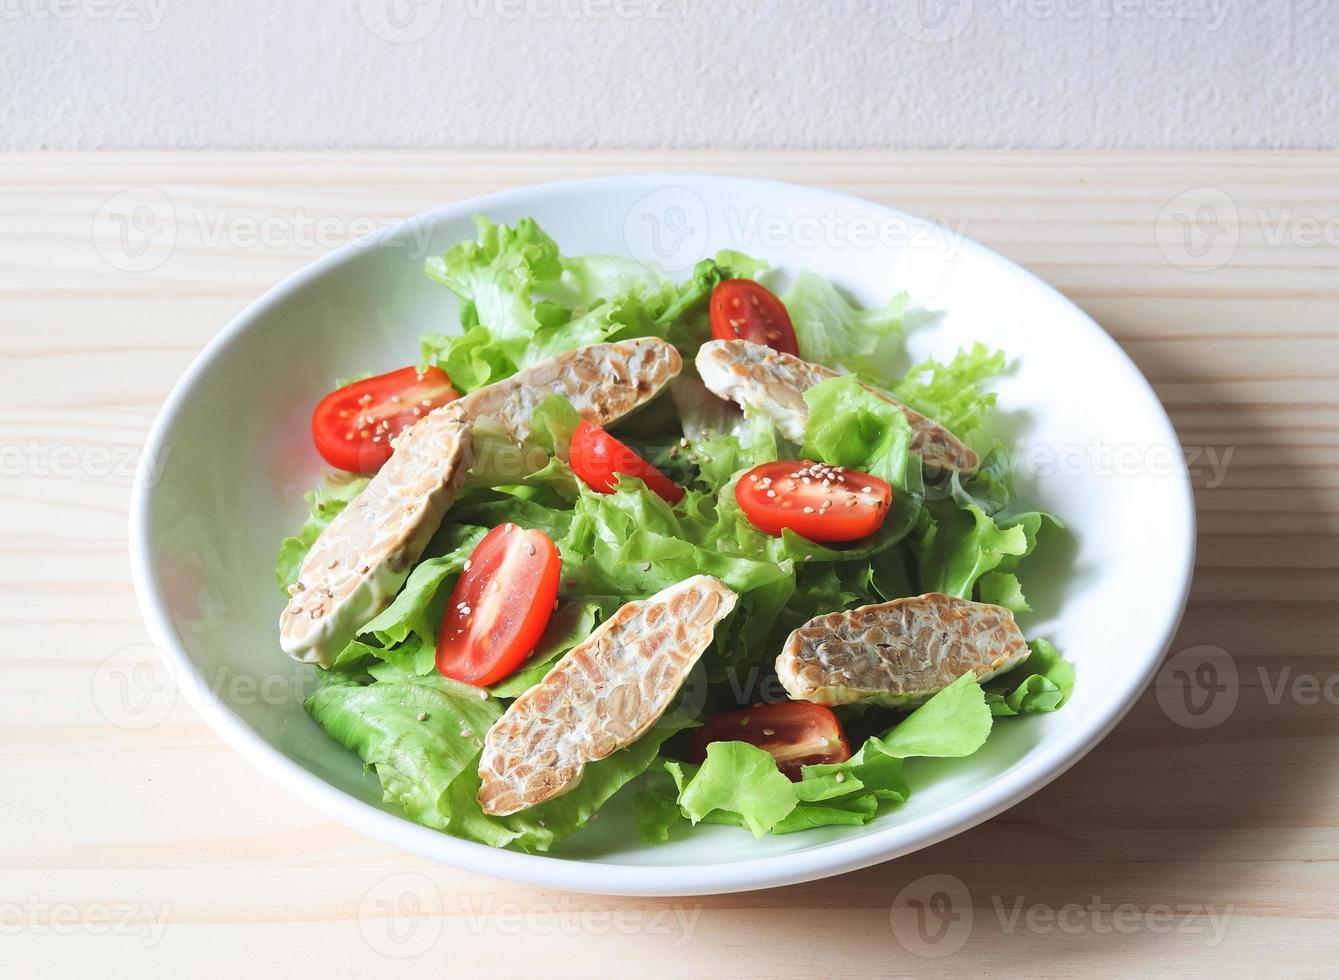 tempeh or tempe salad with tomato and green vegetable in white plate on wooden table. photo